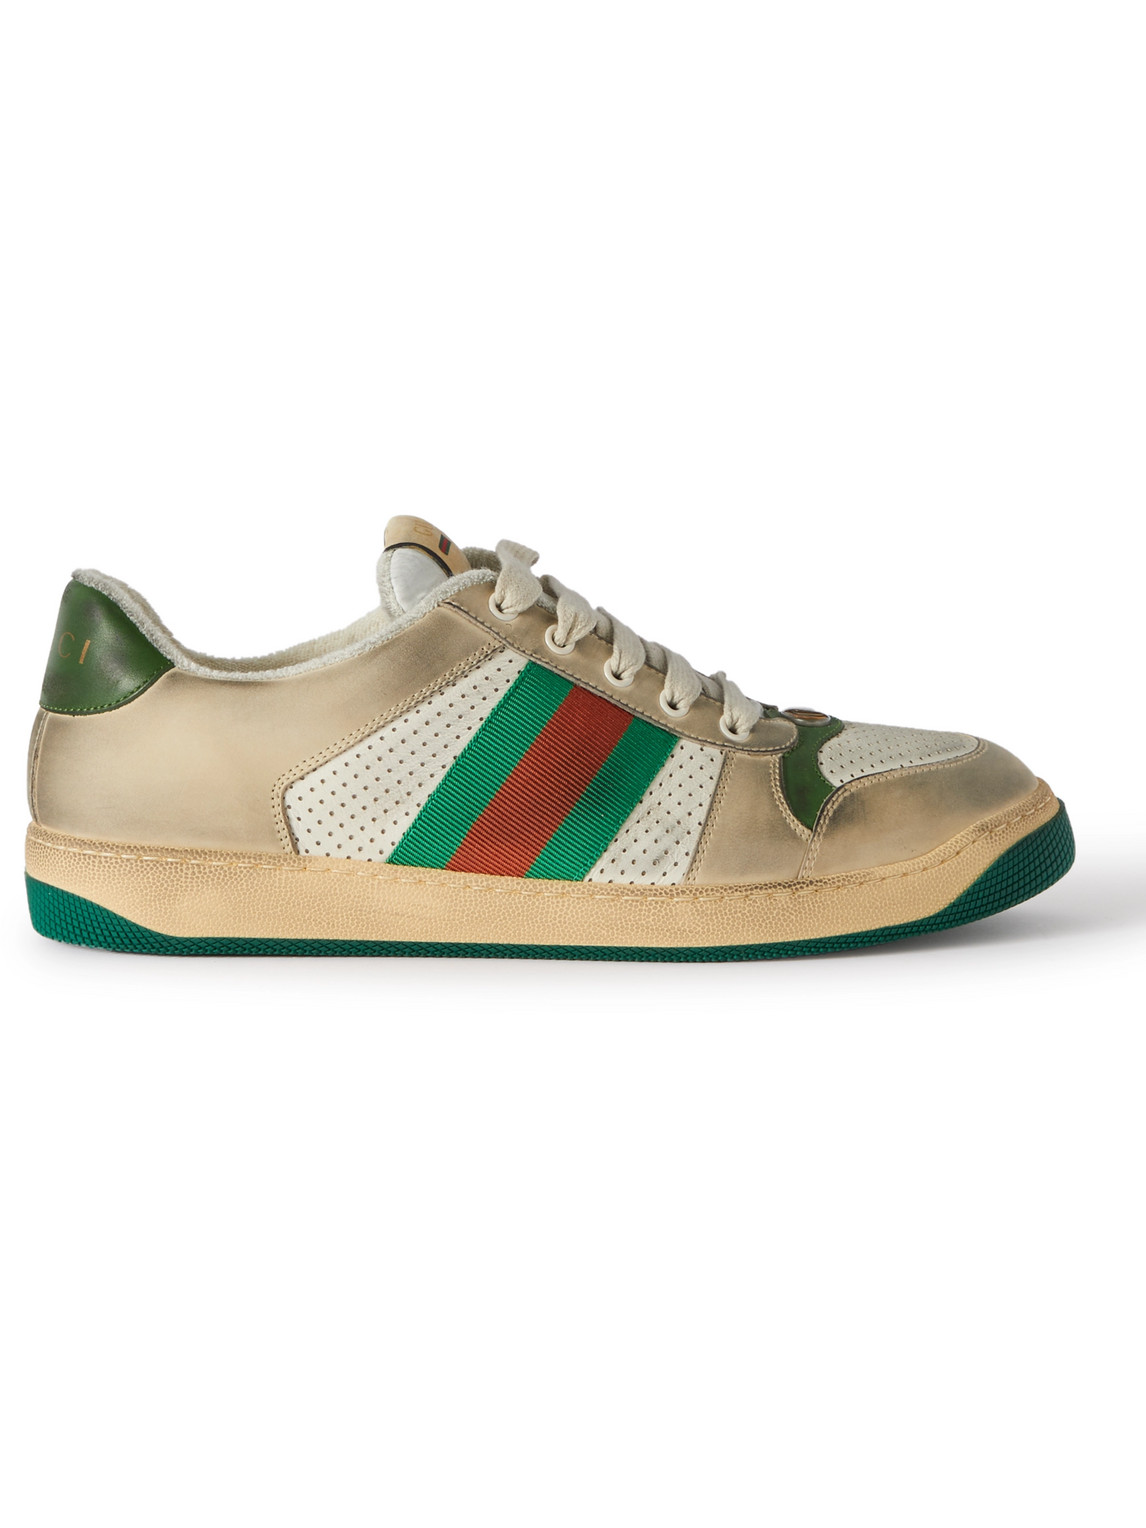 Gucci - Virtus Distressed Leather And Webbing Sneakers - Men - White - UK 6  for Men